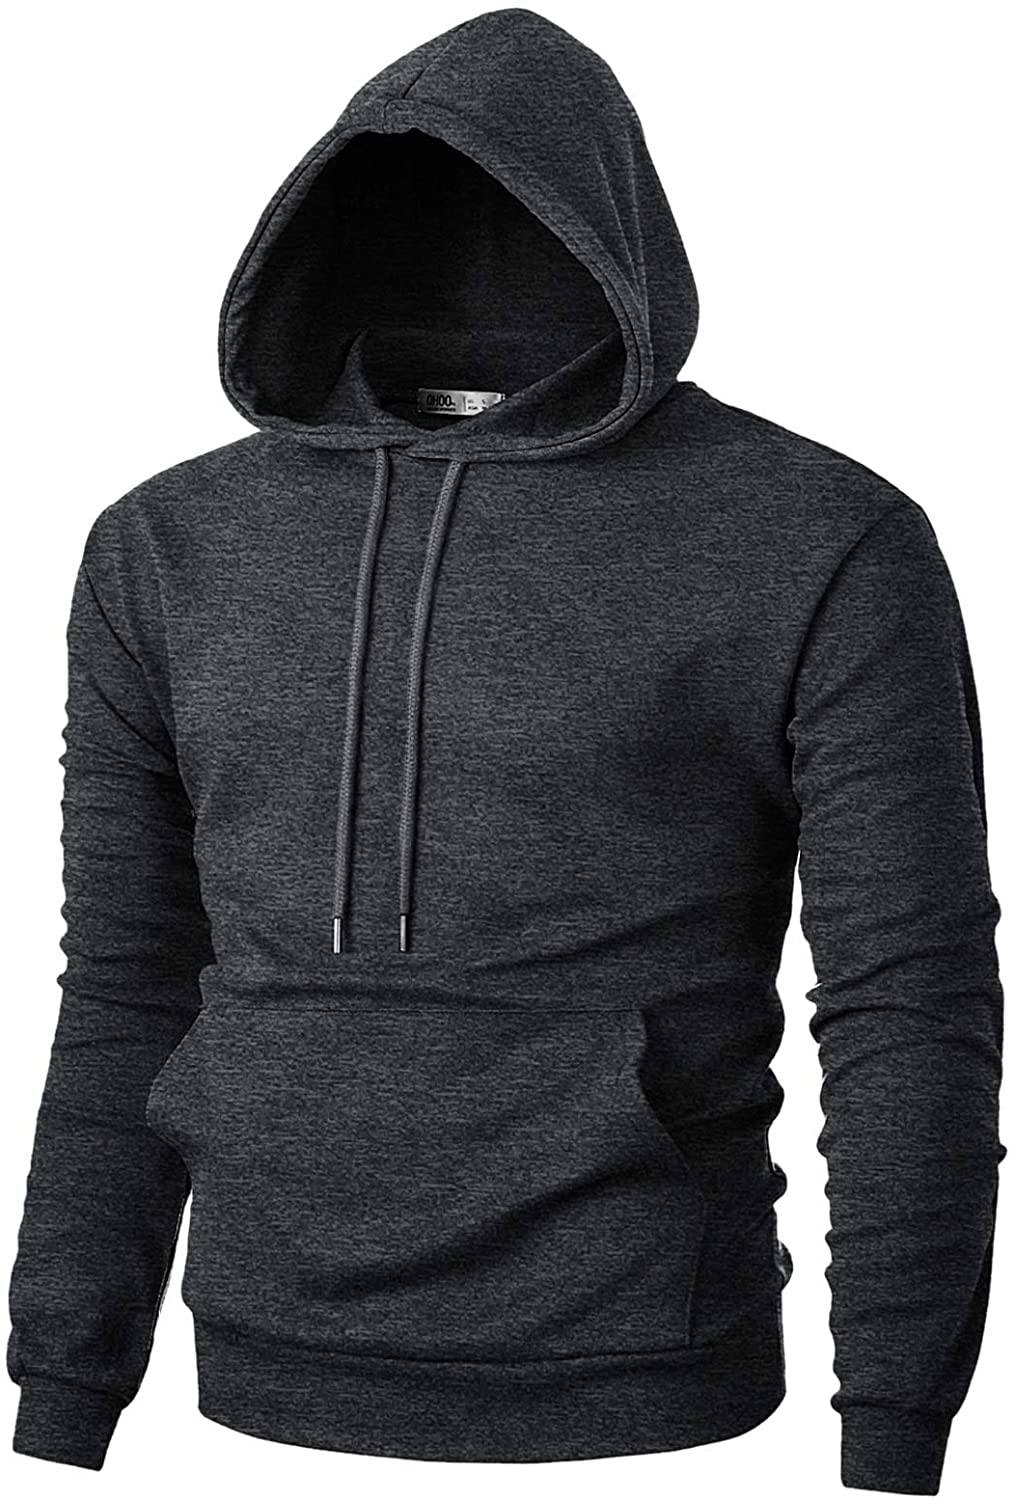 Ohoo Mens Slim Fit Lightweight Zip Up Hoodie with Pockets Long